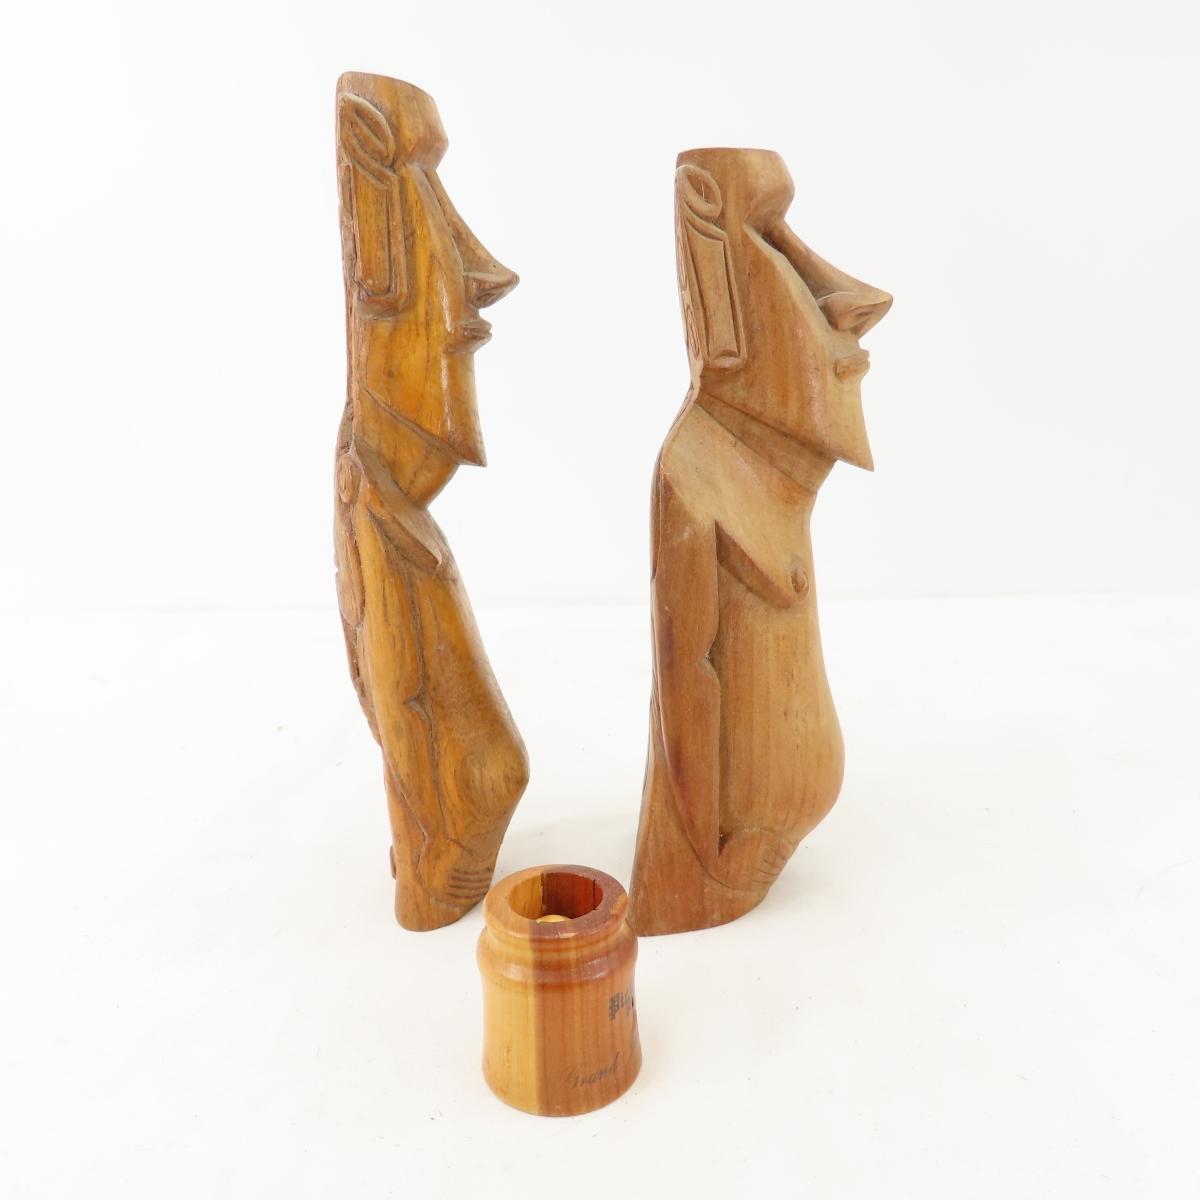 Wooden Sculptures, figures, boxes and more